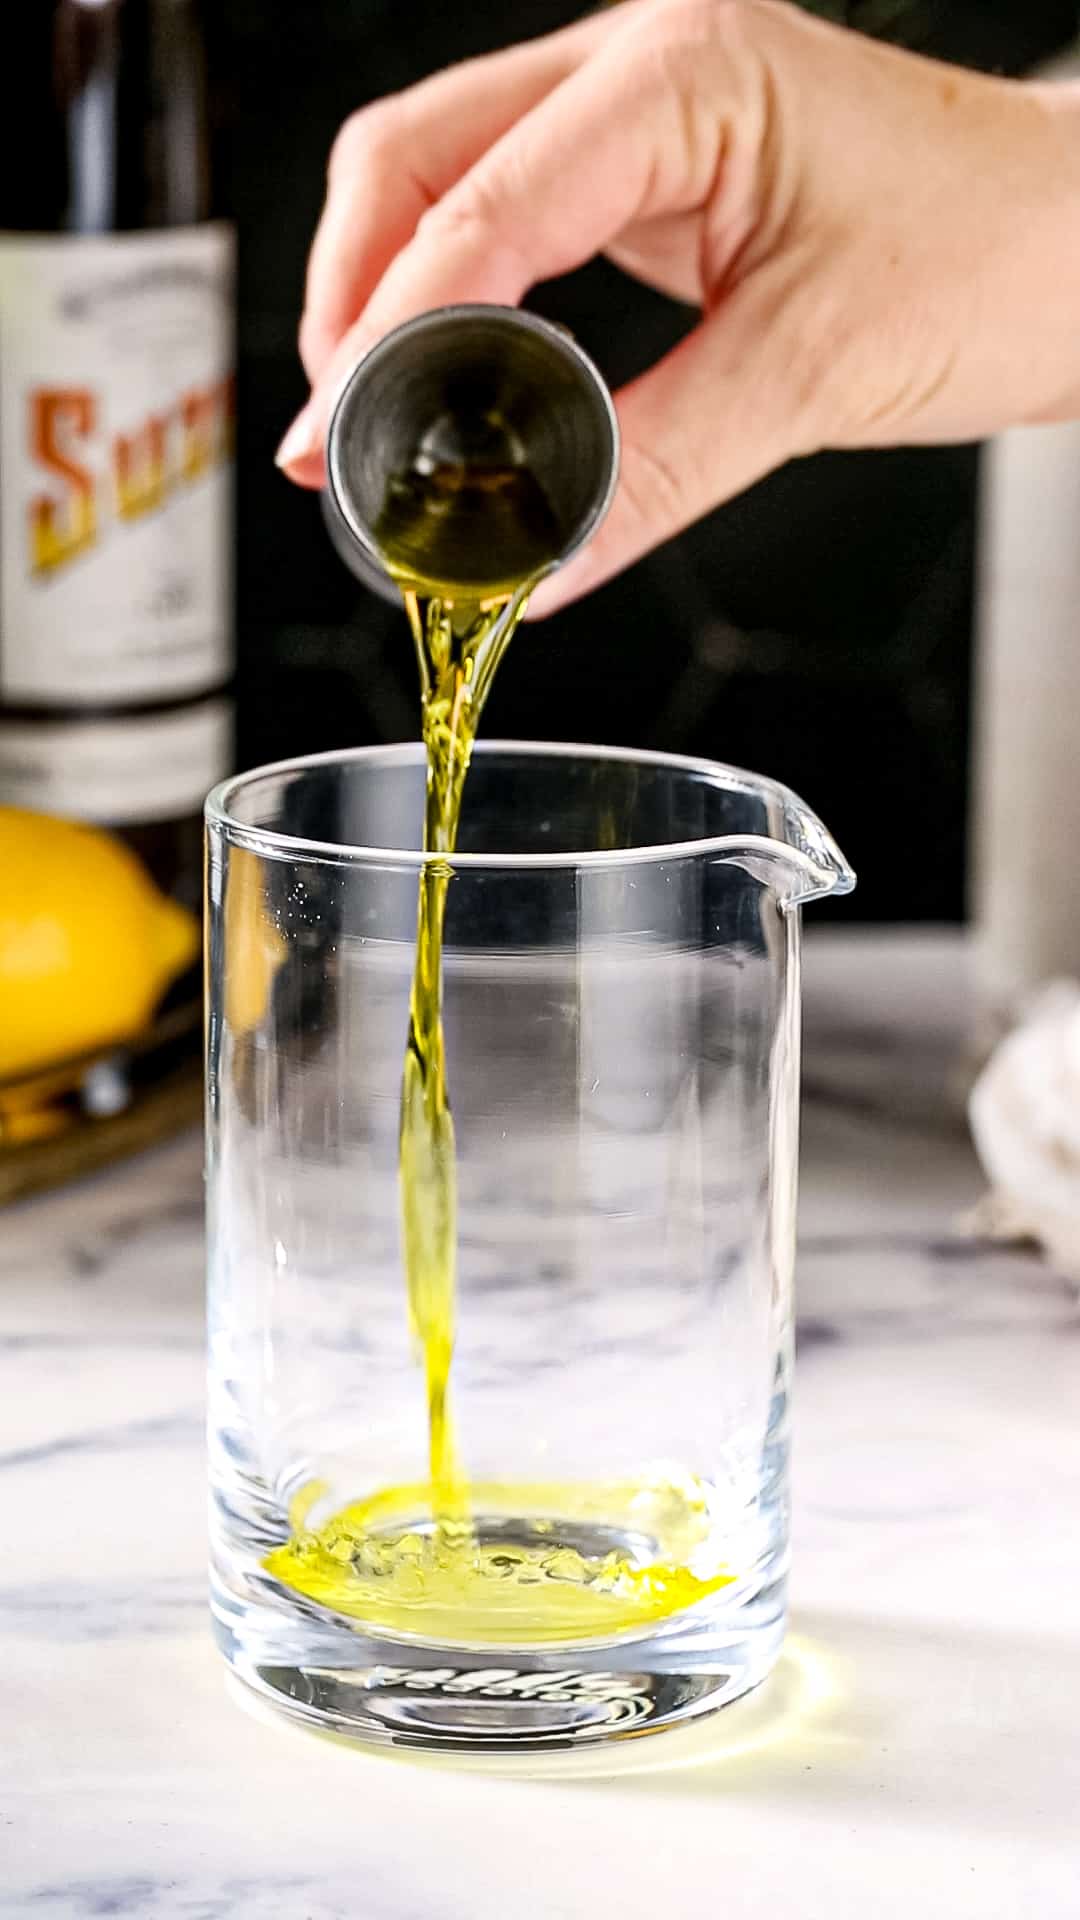 Hand using a jigger to pour Suze liqueur into a mixing glass.